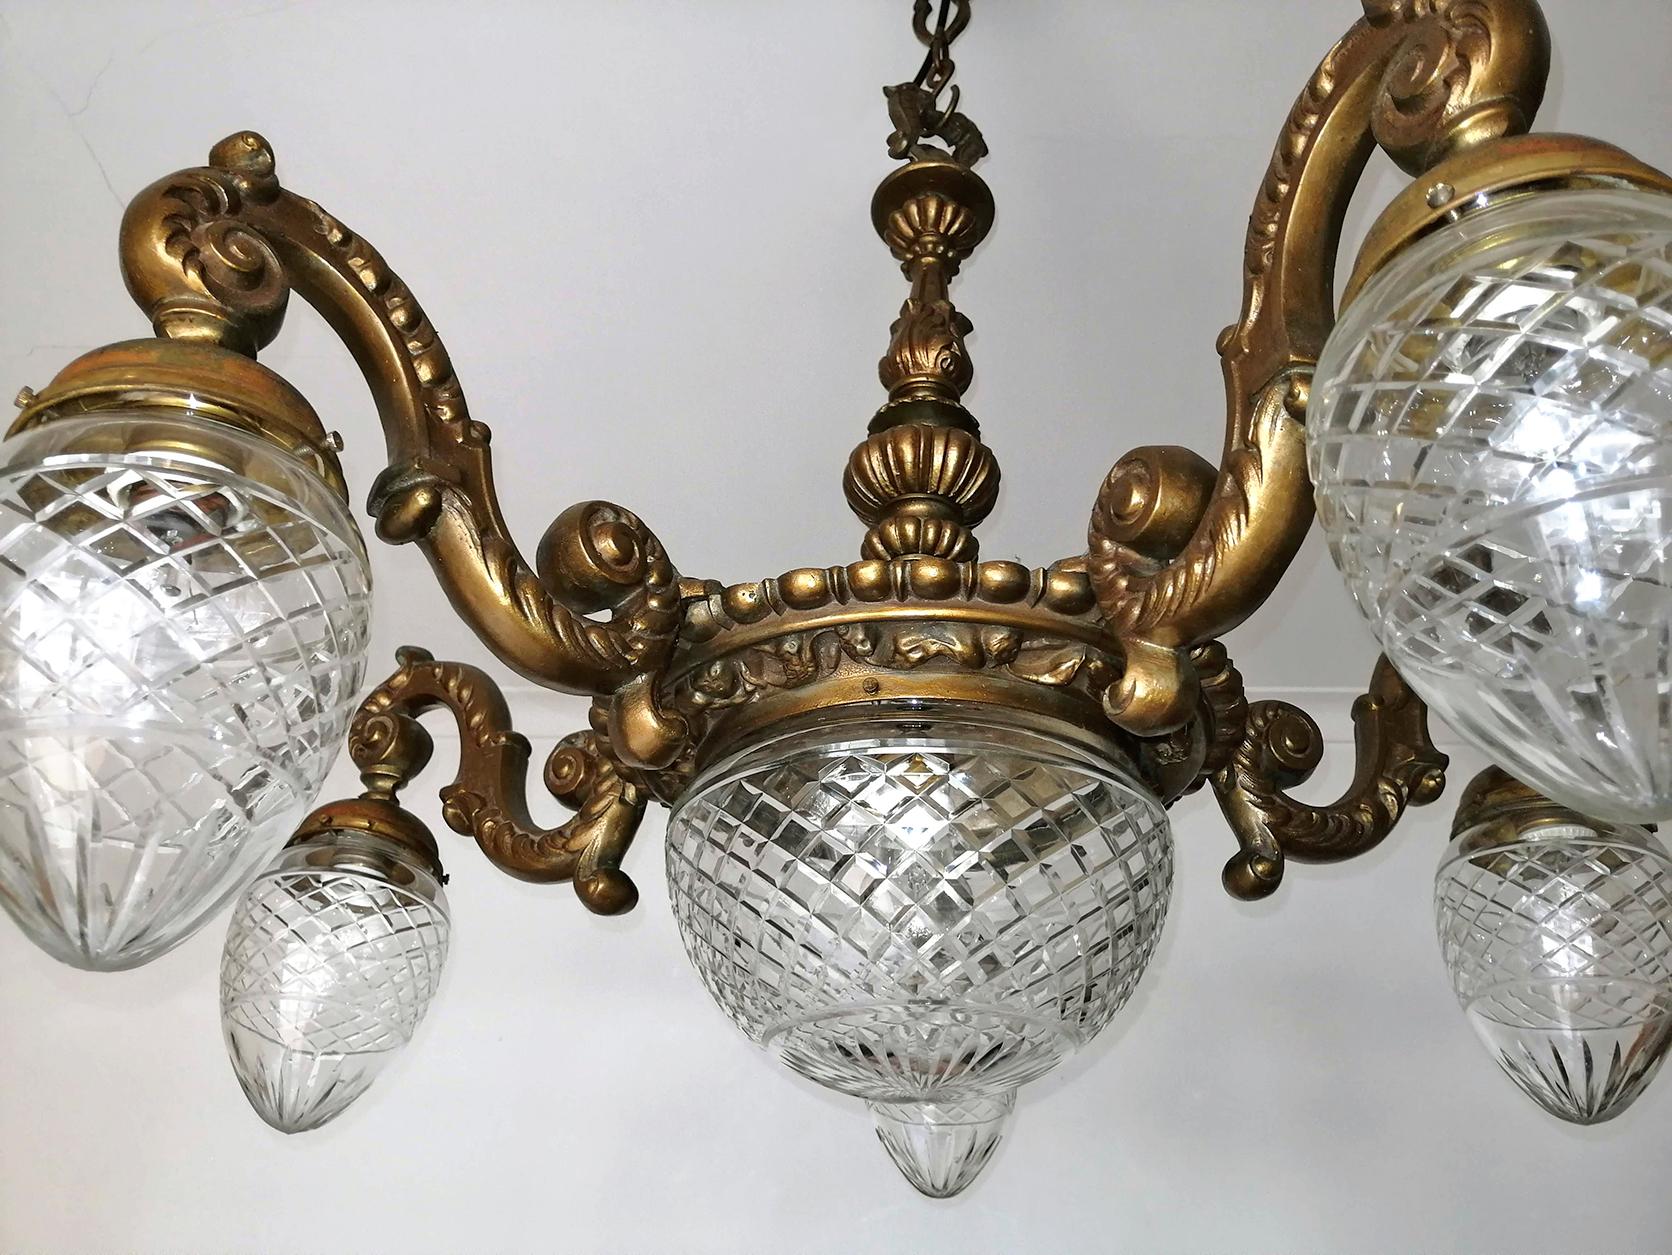 20th Century Large French Art Deco Cut Crystal Globes & Gilt Bronze Ornate Chandelier, 1920s